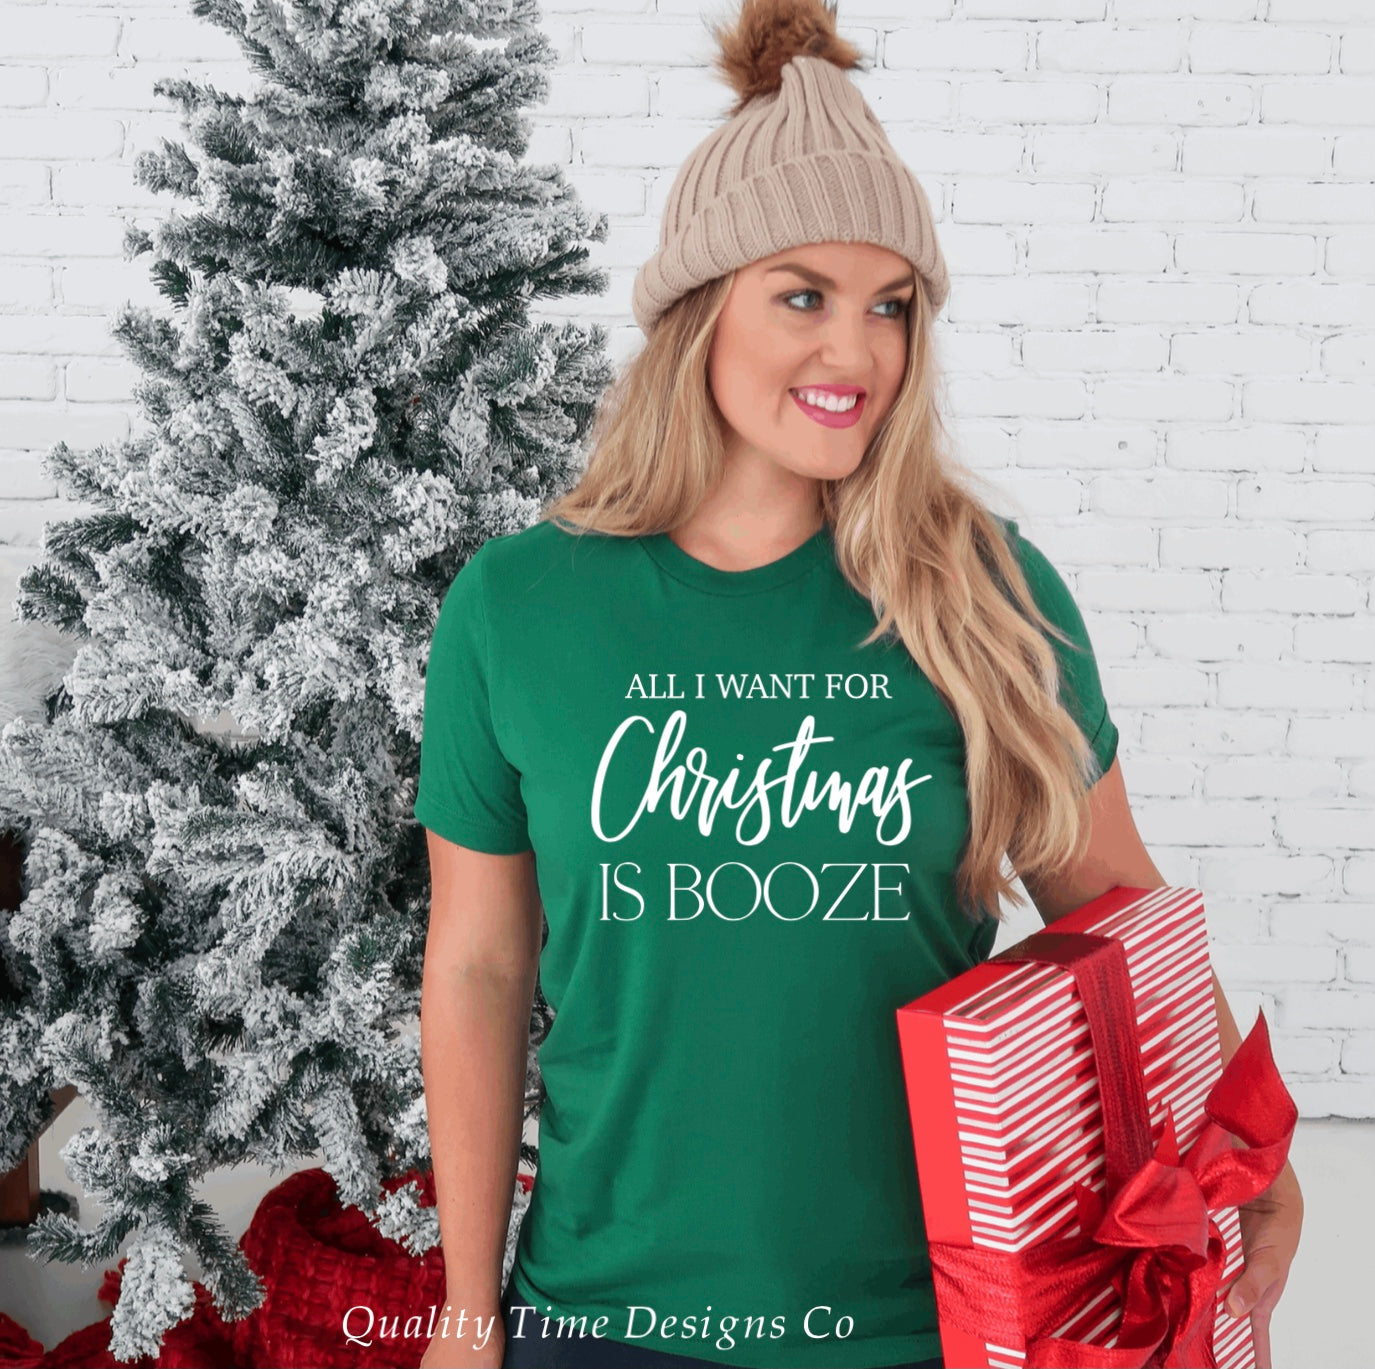 All I want for Christmas is Booze t-shirt 